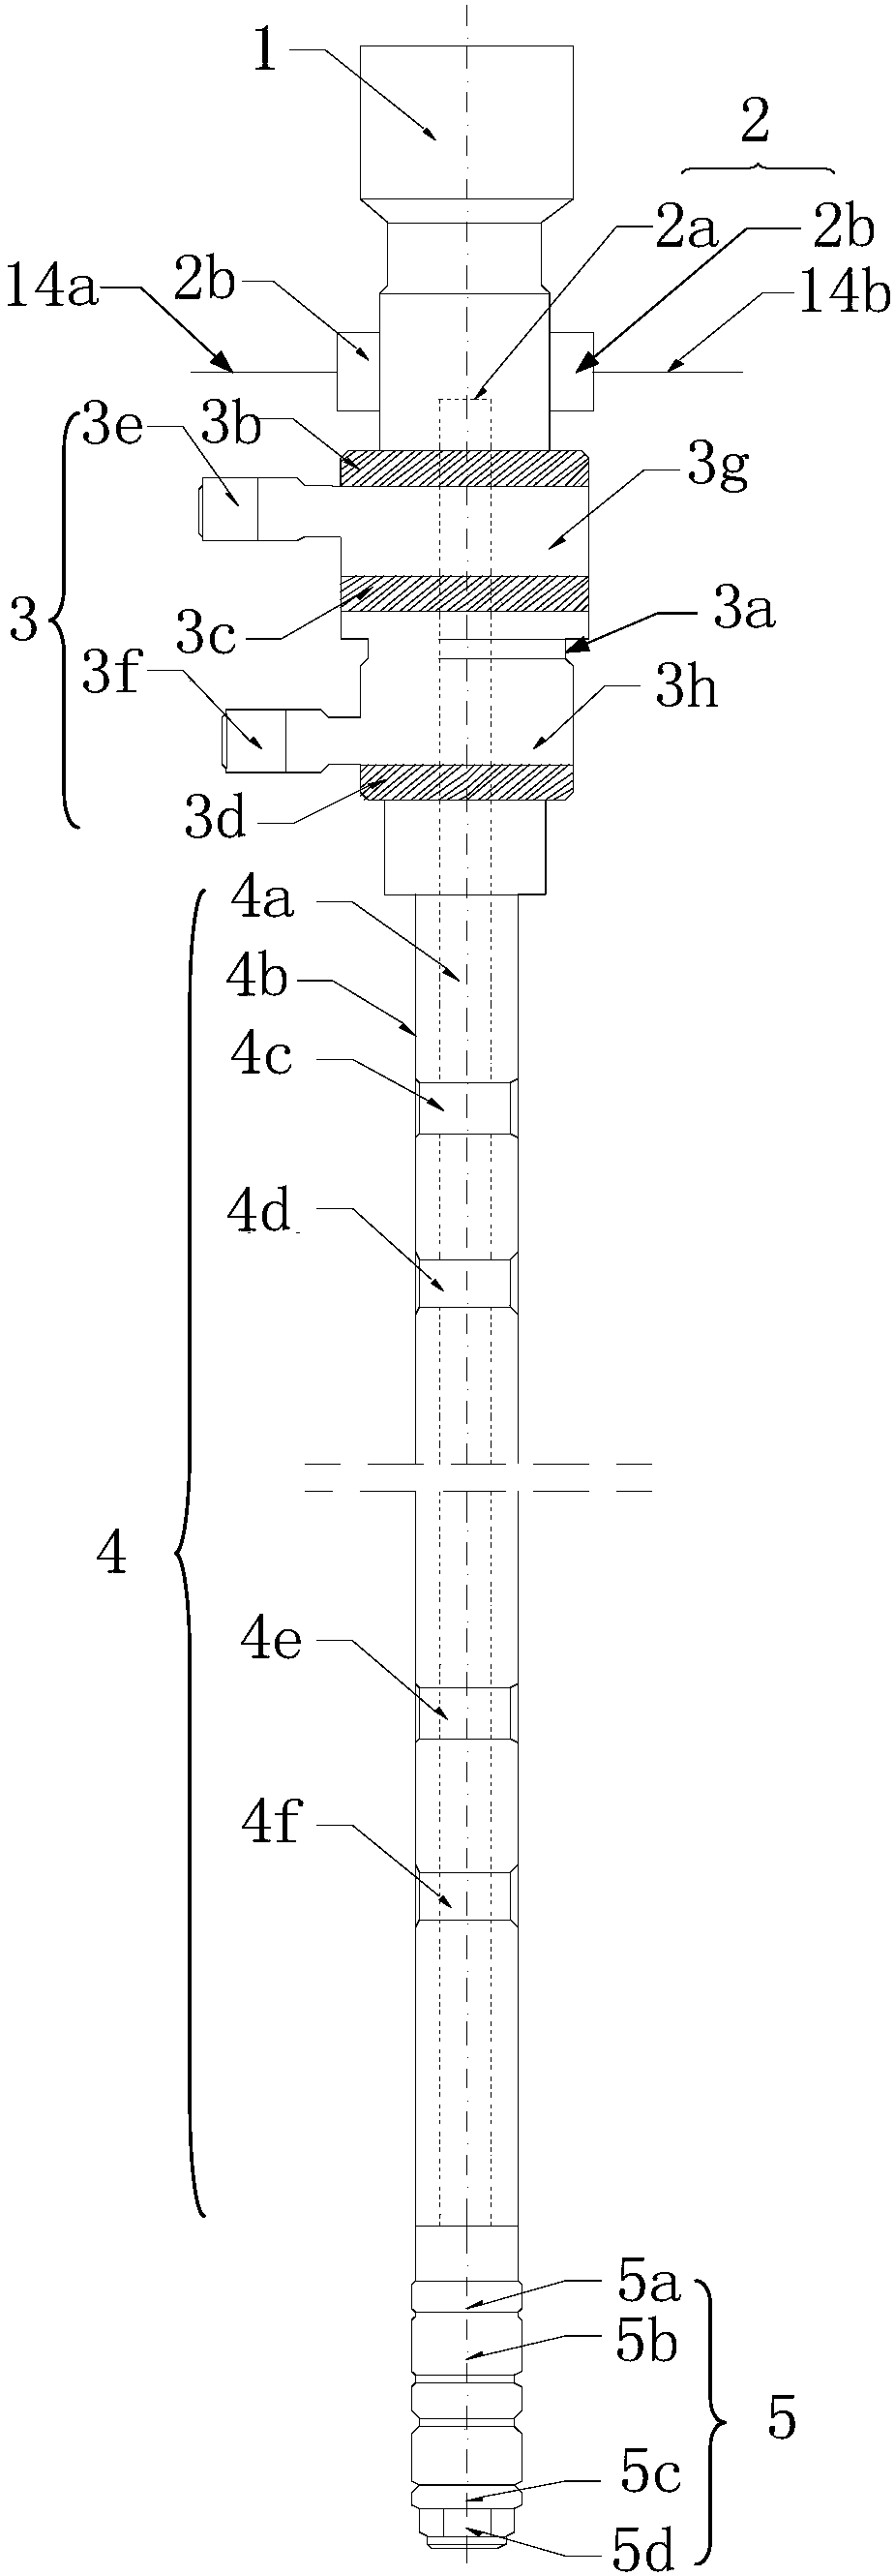 Construction method for conducting pipe interior under-pressure plugging on production pipe string